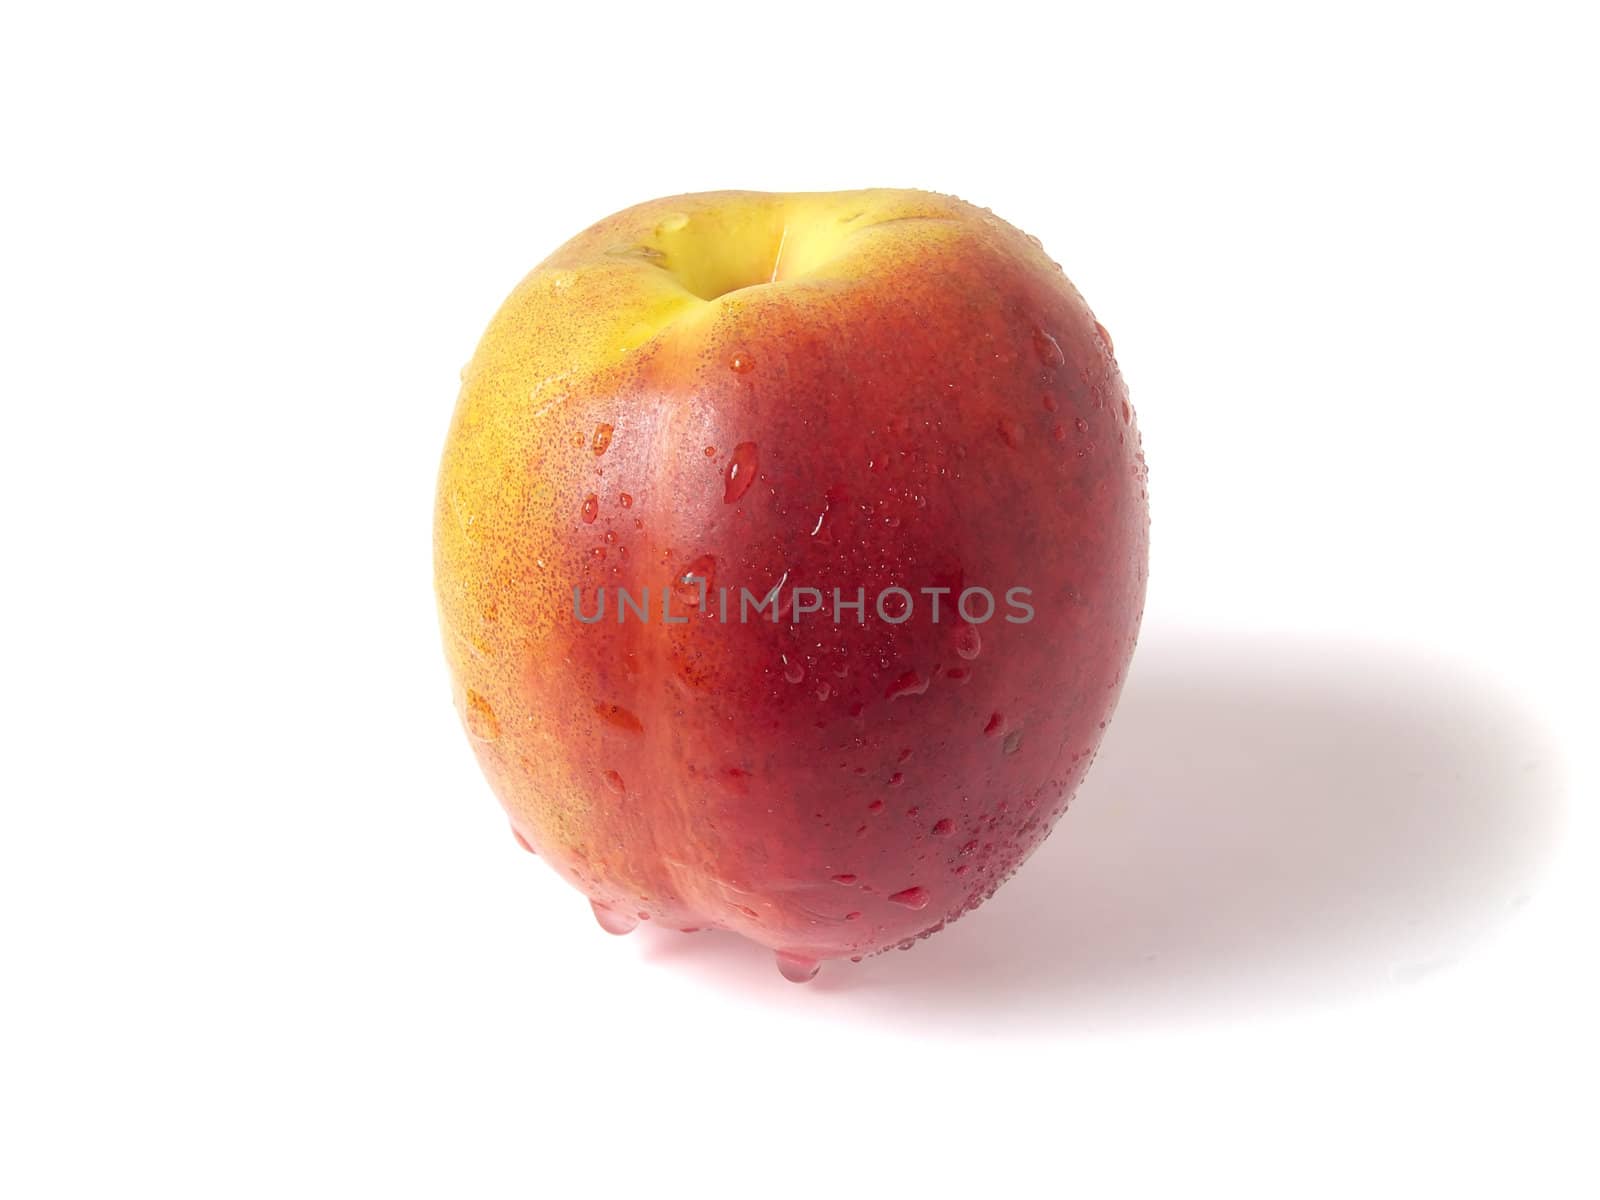 Tasty juicy nectarine with water droplets on a white background whith clipping mask. Shadows is not included in clipping mask